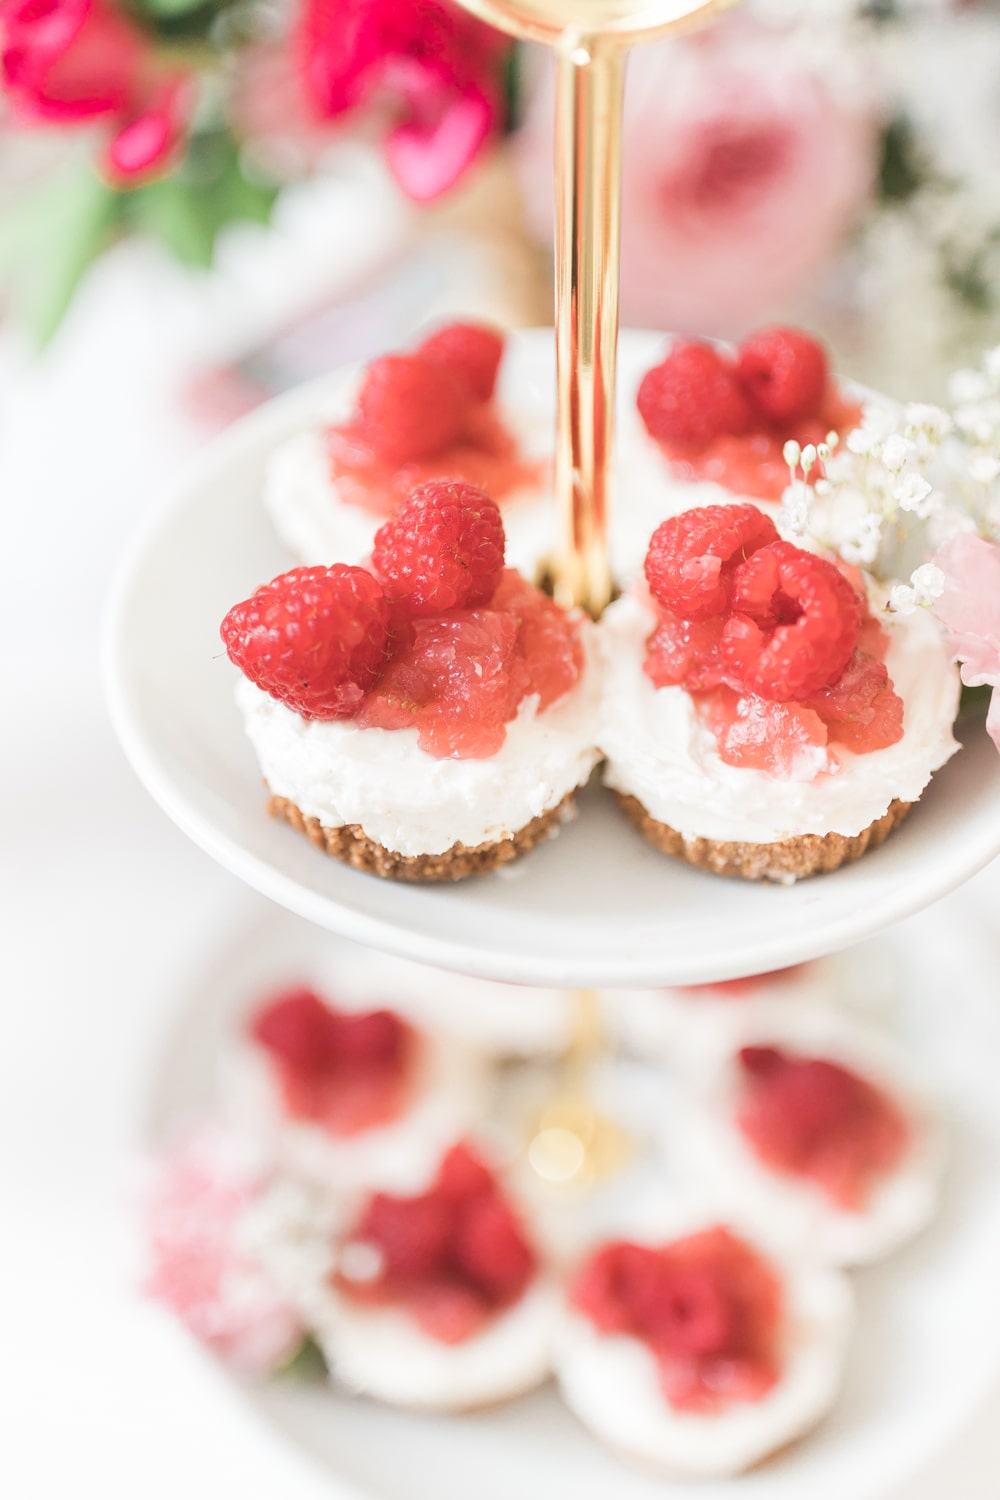 No bake mini strawberry cheesecakes served as part of a Galentine's Day menu by blogger Stephanie Ziajka on Diary of a Debutante